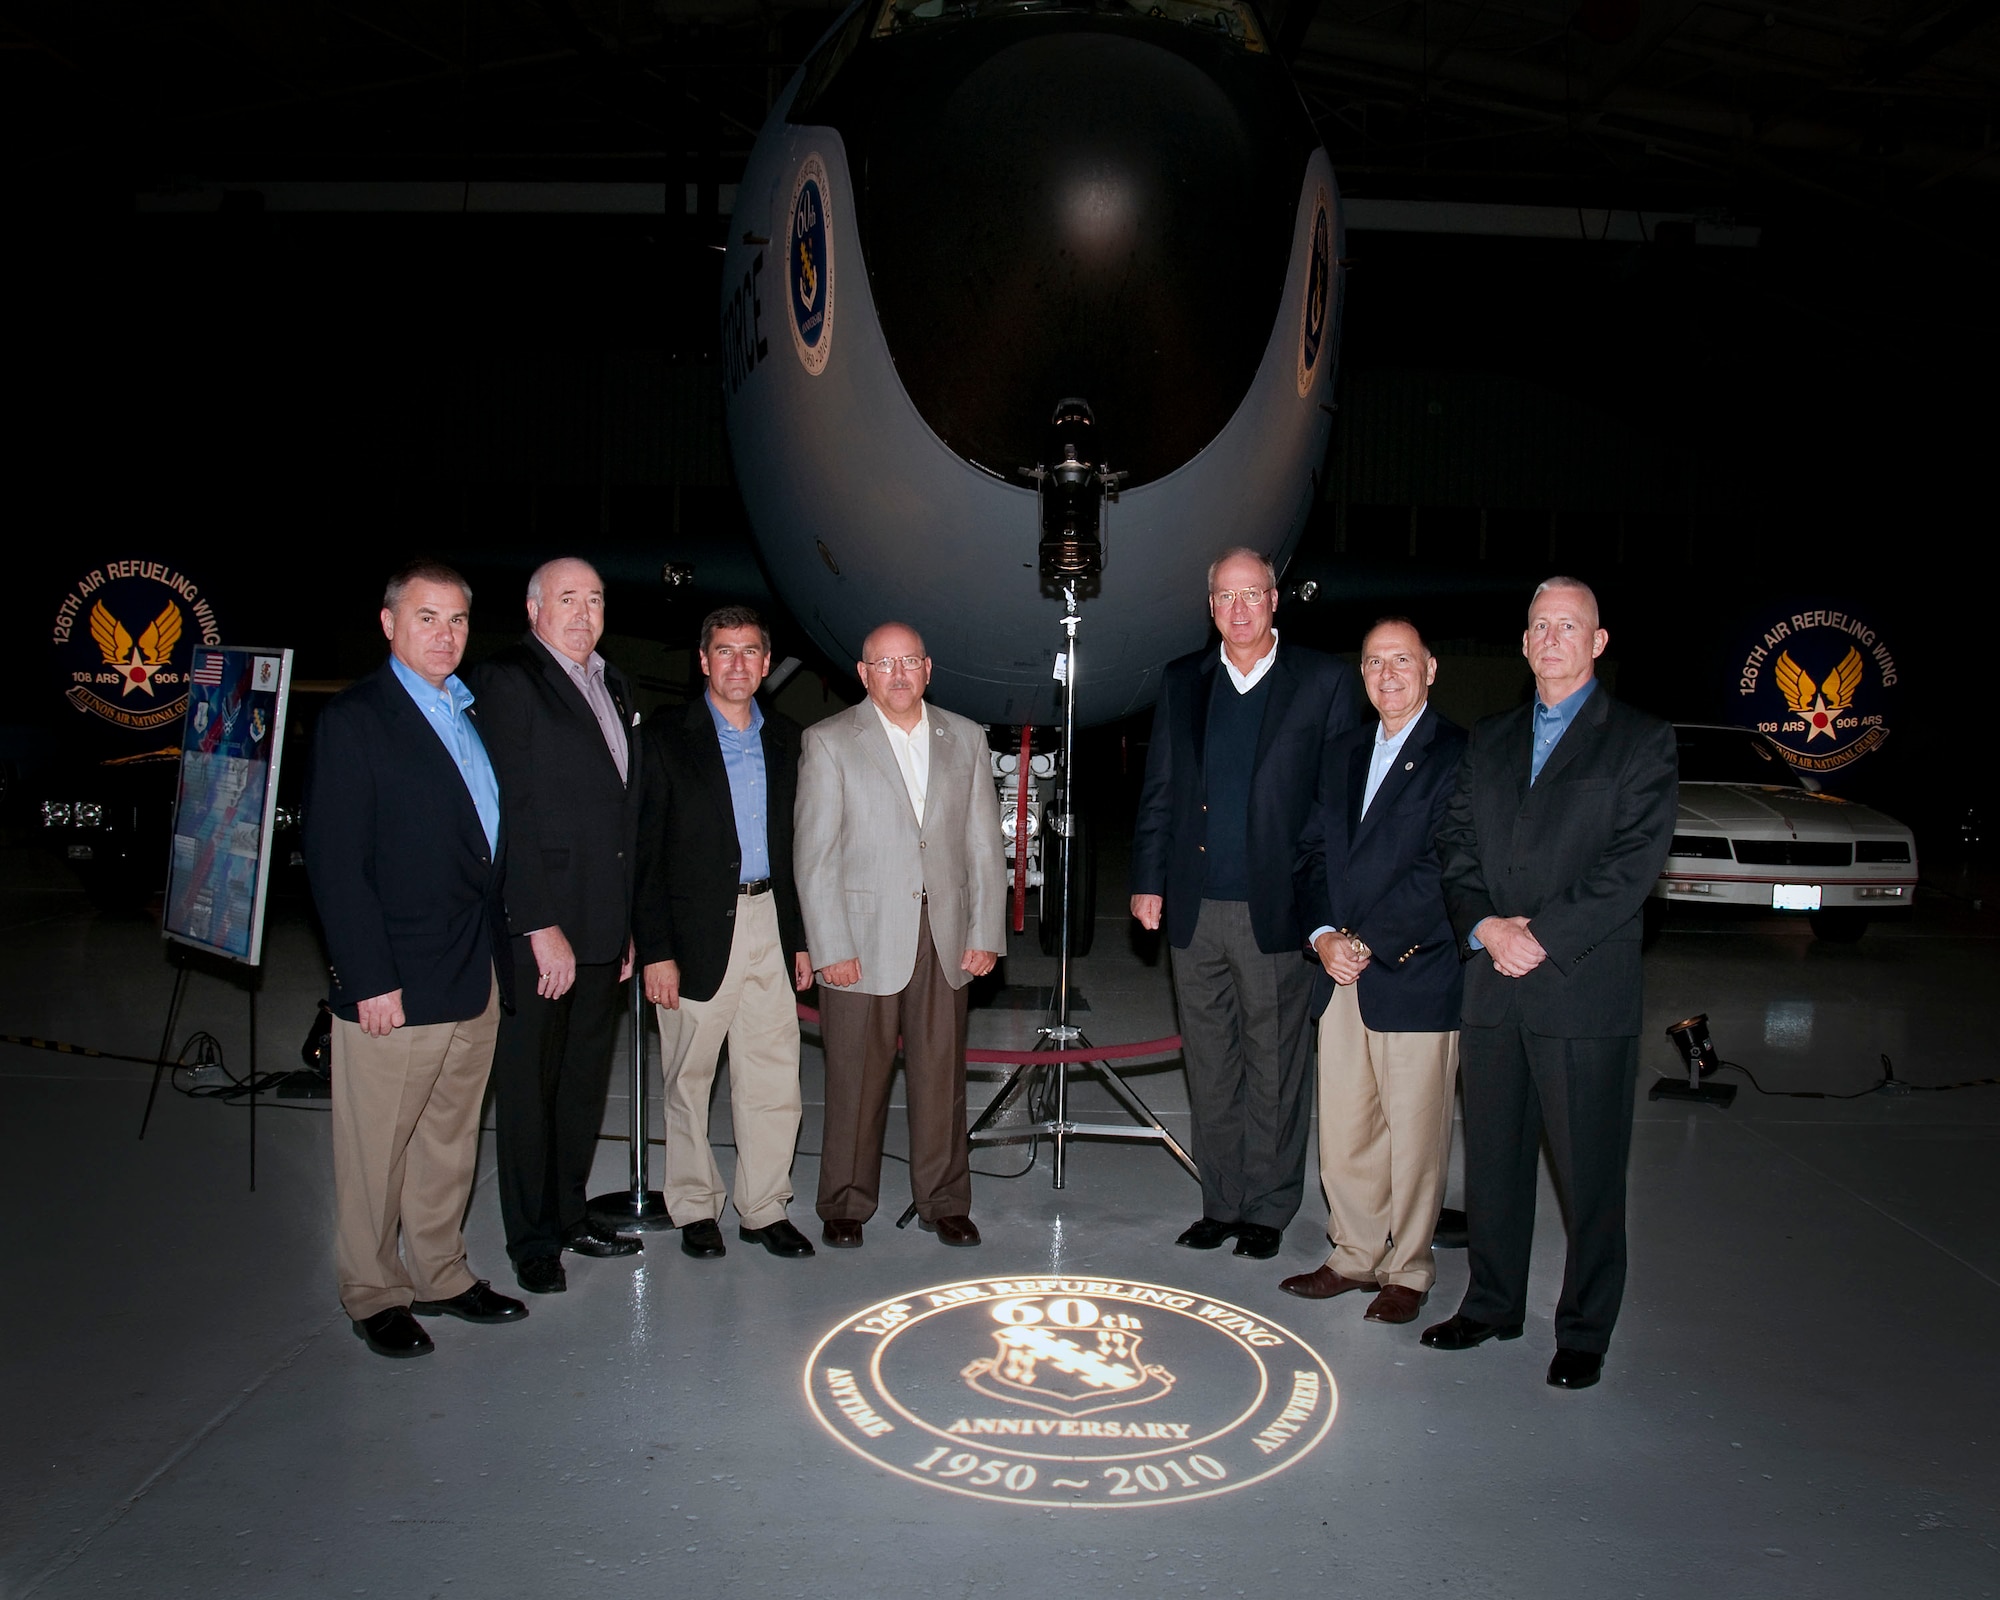 The 126th Air Refueling Wing at Scott Air Force Base, celebrated its 60th Anniversary Oct. 2.  The celebration was in one of the hangers and displayed the KC-135 Stratotanker and other memorabilia.  In attendance (left to right) Air Force Brig. Gen. James Schroeder, Assistant Adjutant General-Air for the Illinois National Guard; retired Air Force Brig. Gen. John Hughes; Air Force Col. Peter Nezamis, Commander of the 126th; Army Maj. Gen. Dennis Celletti, Assistant Adjutant General-Army for the Illinois National Guard; Air Force Gen. Craig R McKinley, Chief of the National Guard Bureau; Army Maj. Gen. William Enyart, The Adjutant General of the Illinois National Guard, and Army Brig. Gen. Steven Huber, Director of the Joint Staff Joint Force Headquarters Illinois. (Photo by Pfc. Jason Northcutt, 139th Mobile Public Affairs Detachment)